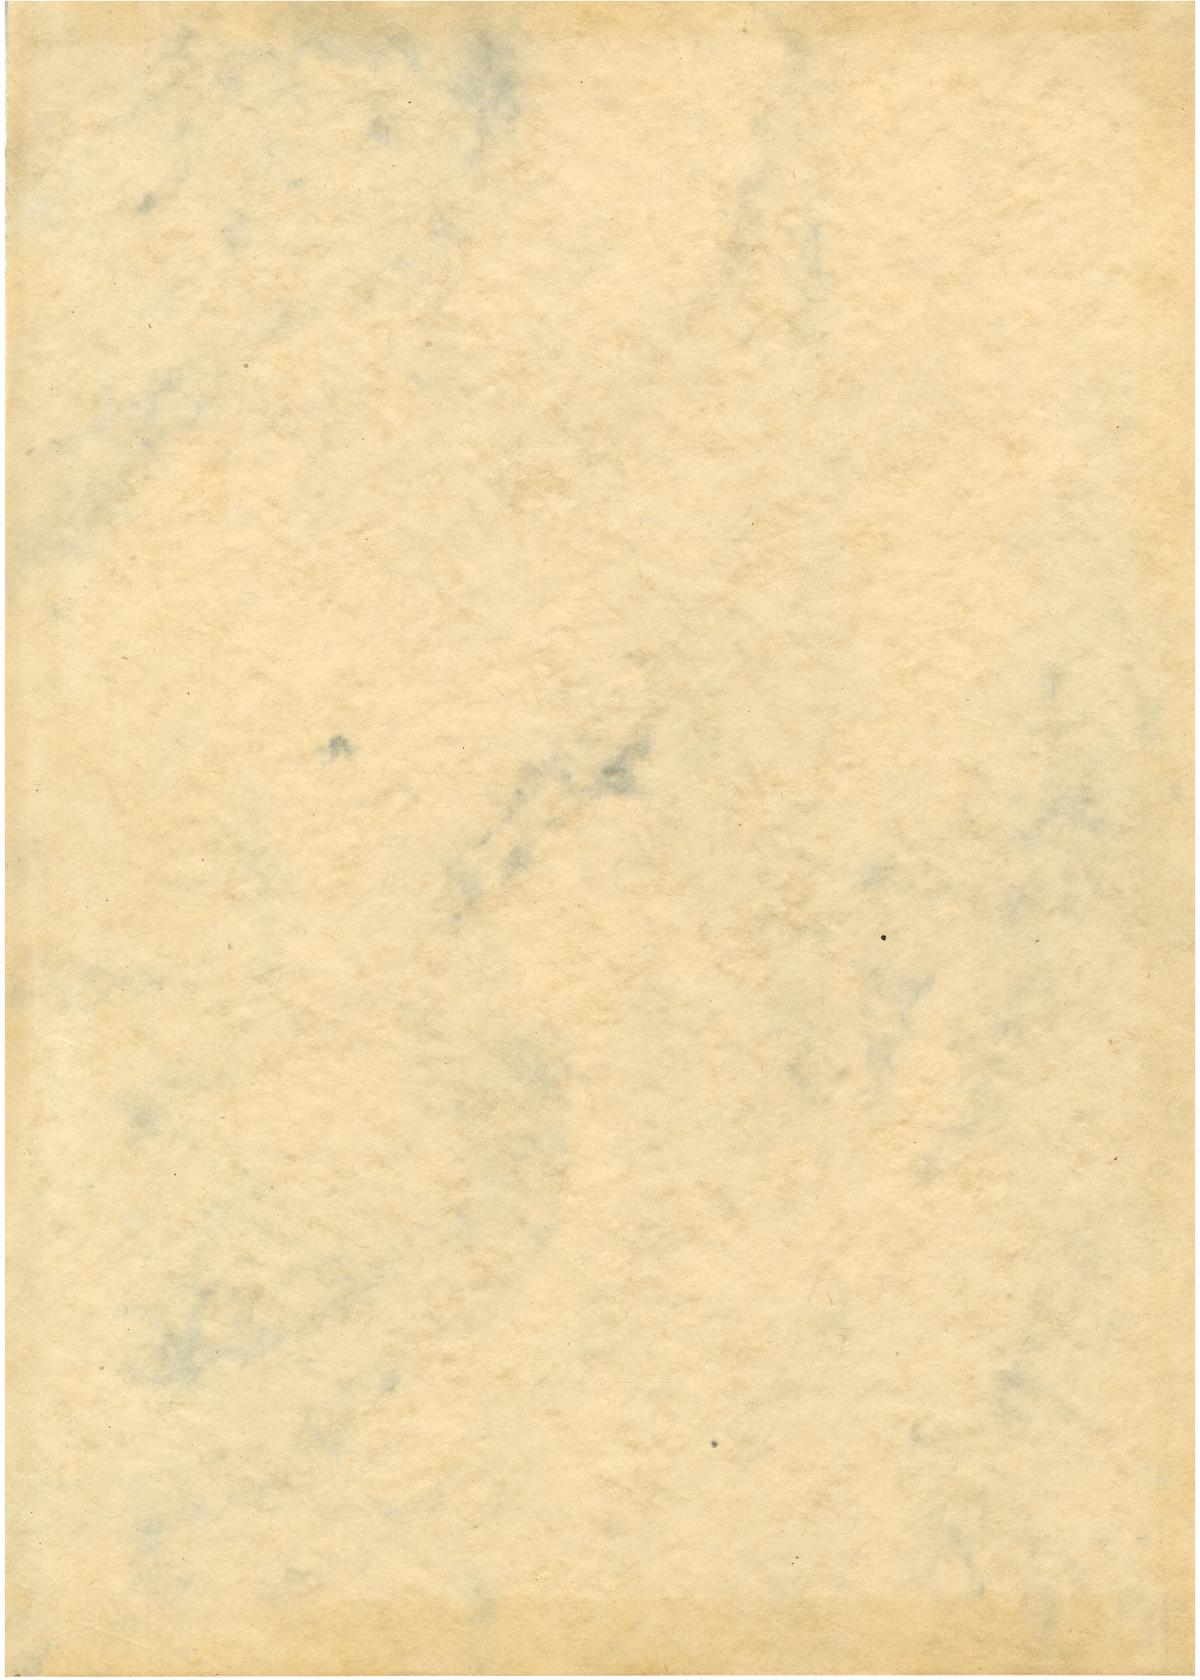 The Trail, Yearbook of Daniel Baker College, 1920
                                                
                                                    Front Inside
                                                